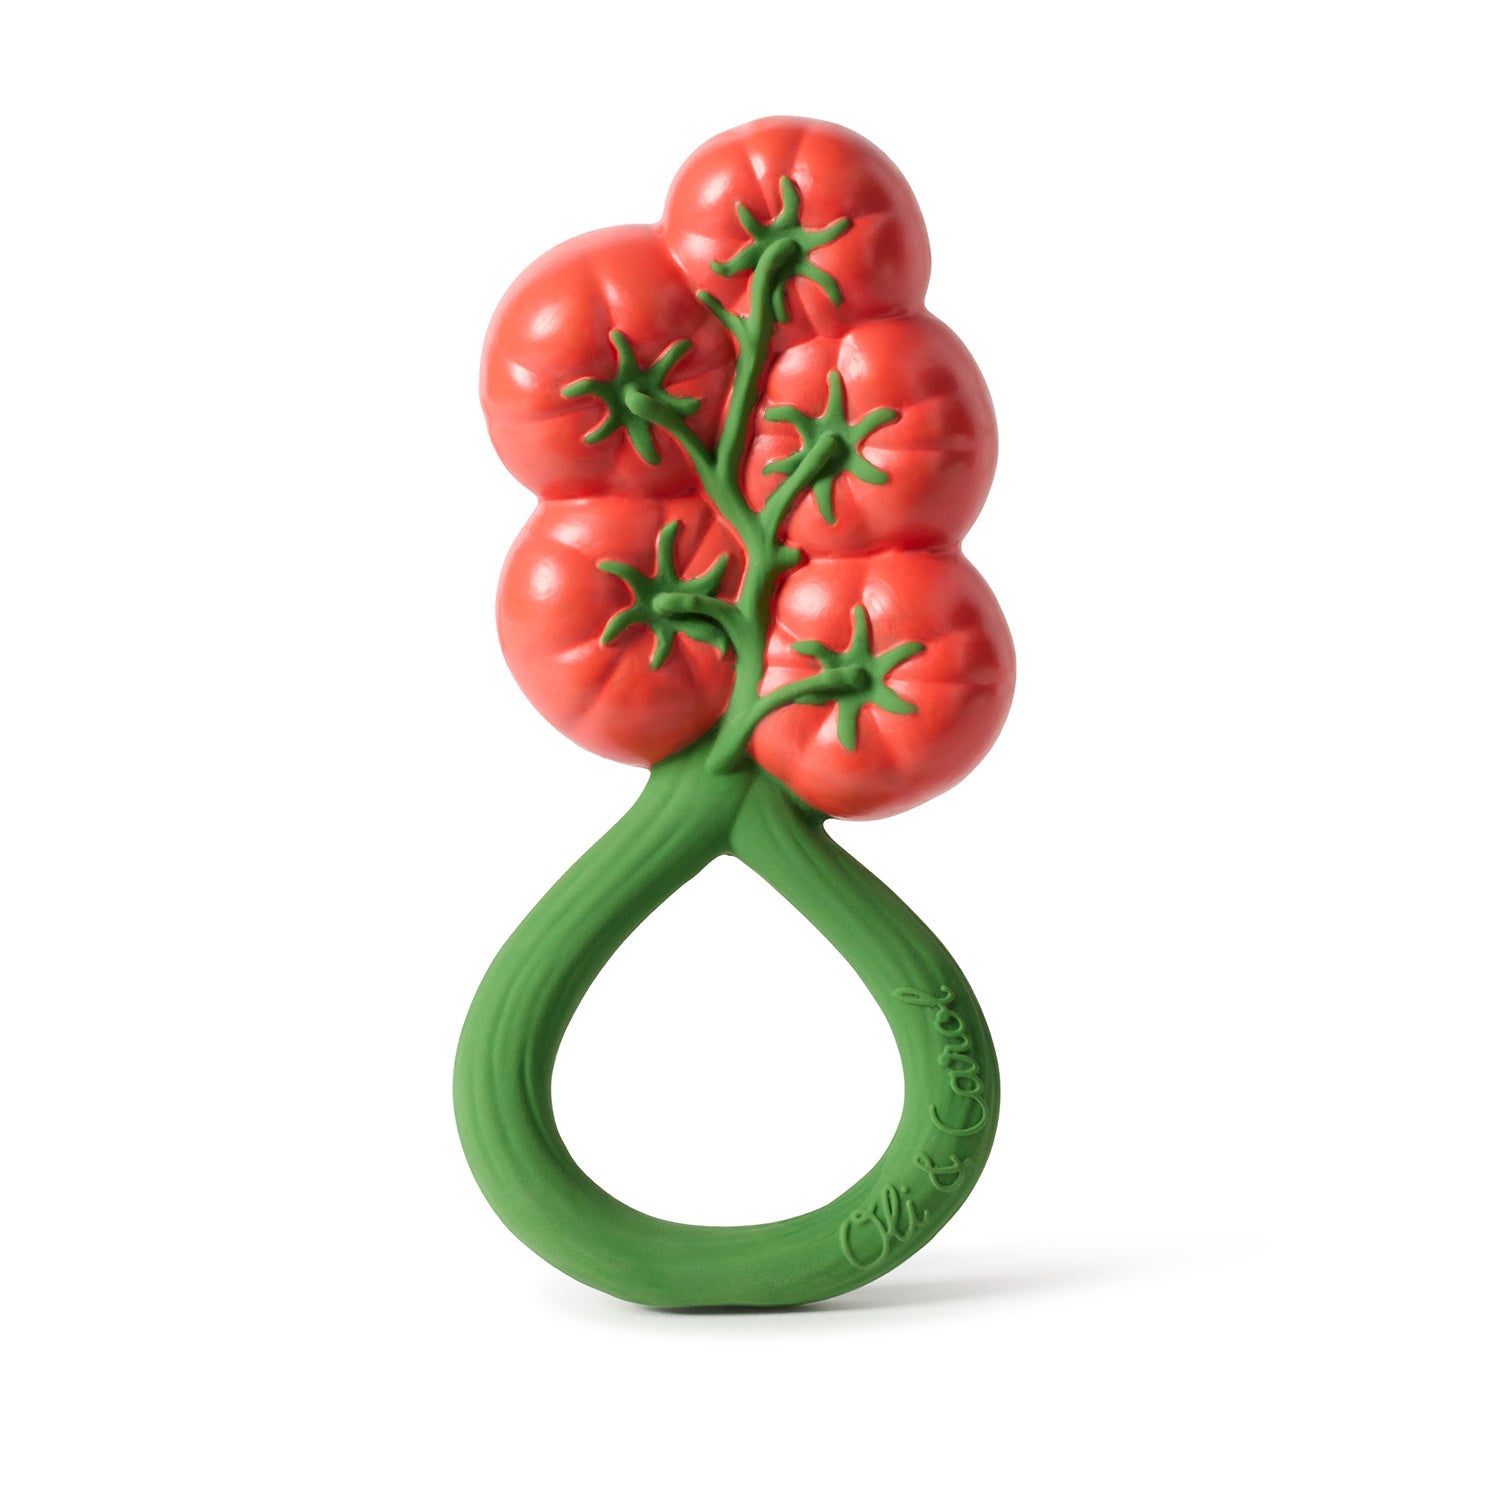 Oli & Carol - Natural Rattle Toys - all things being eco chilliwack - natural rubber teething toys - tomatoes